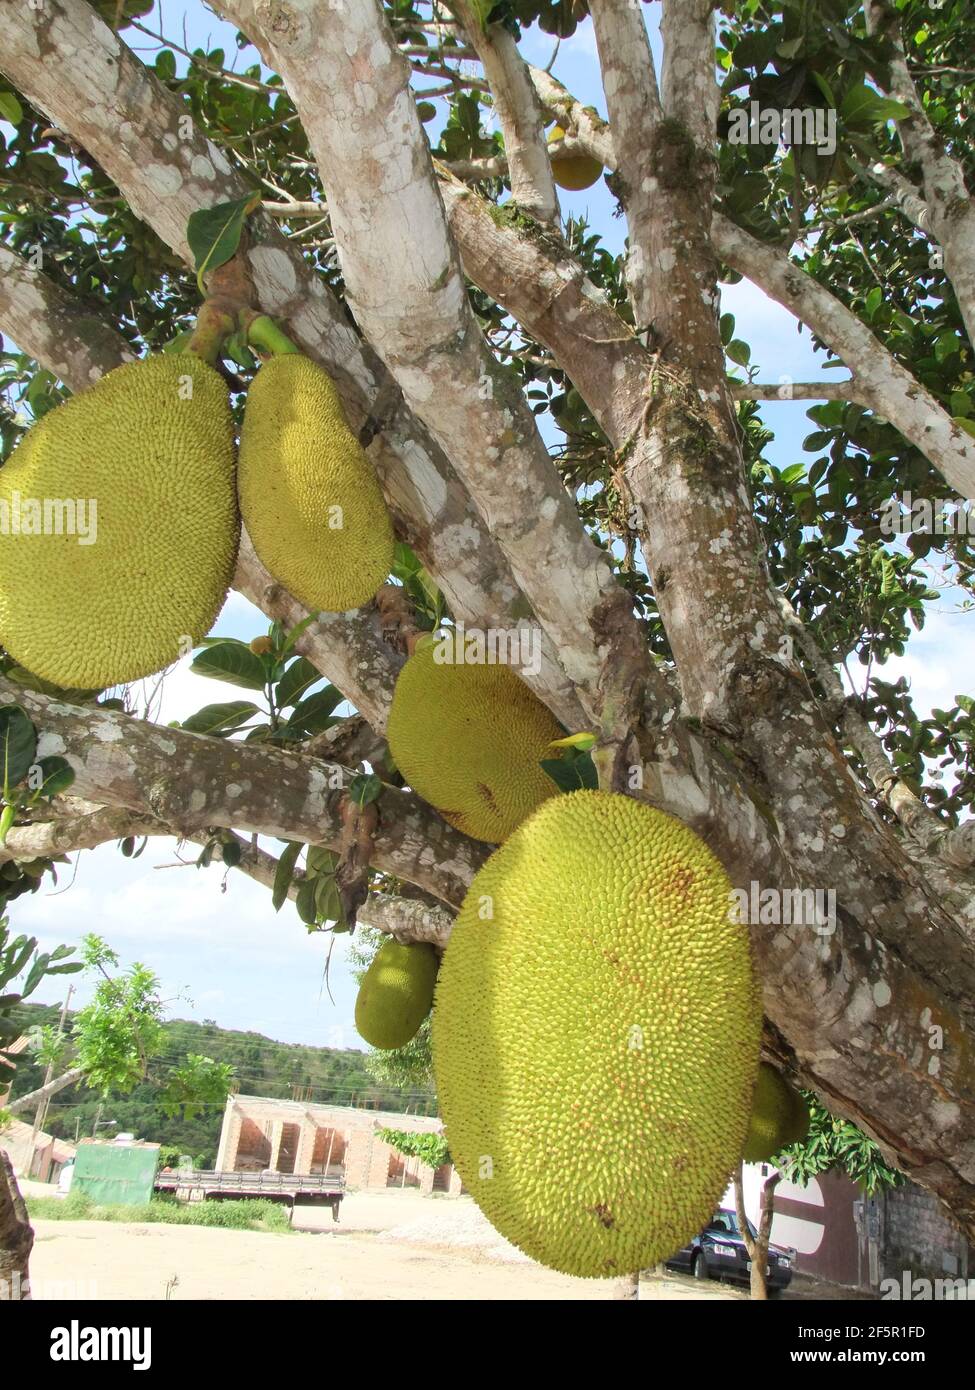 conde, bahia / brazil - september 16, 2012: Jackfruit is seen with its fruits on a farm in the city of Conde. *** Local Caption *** Stock Photo